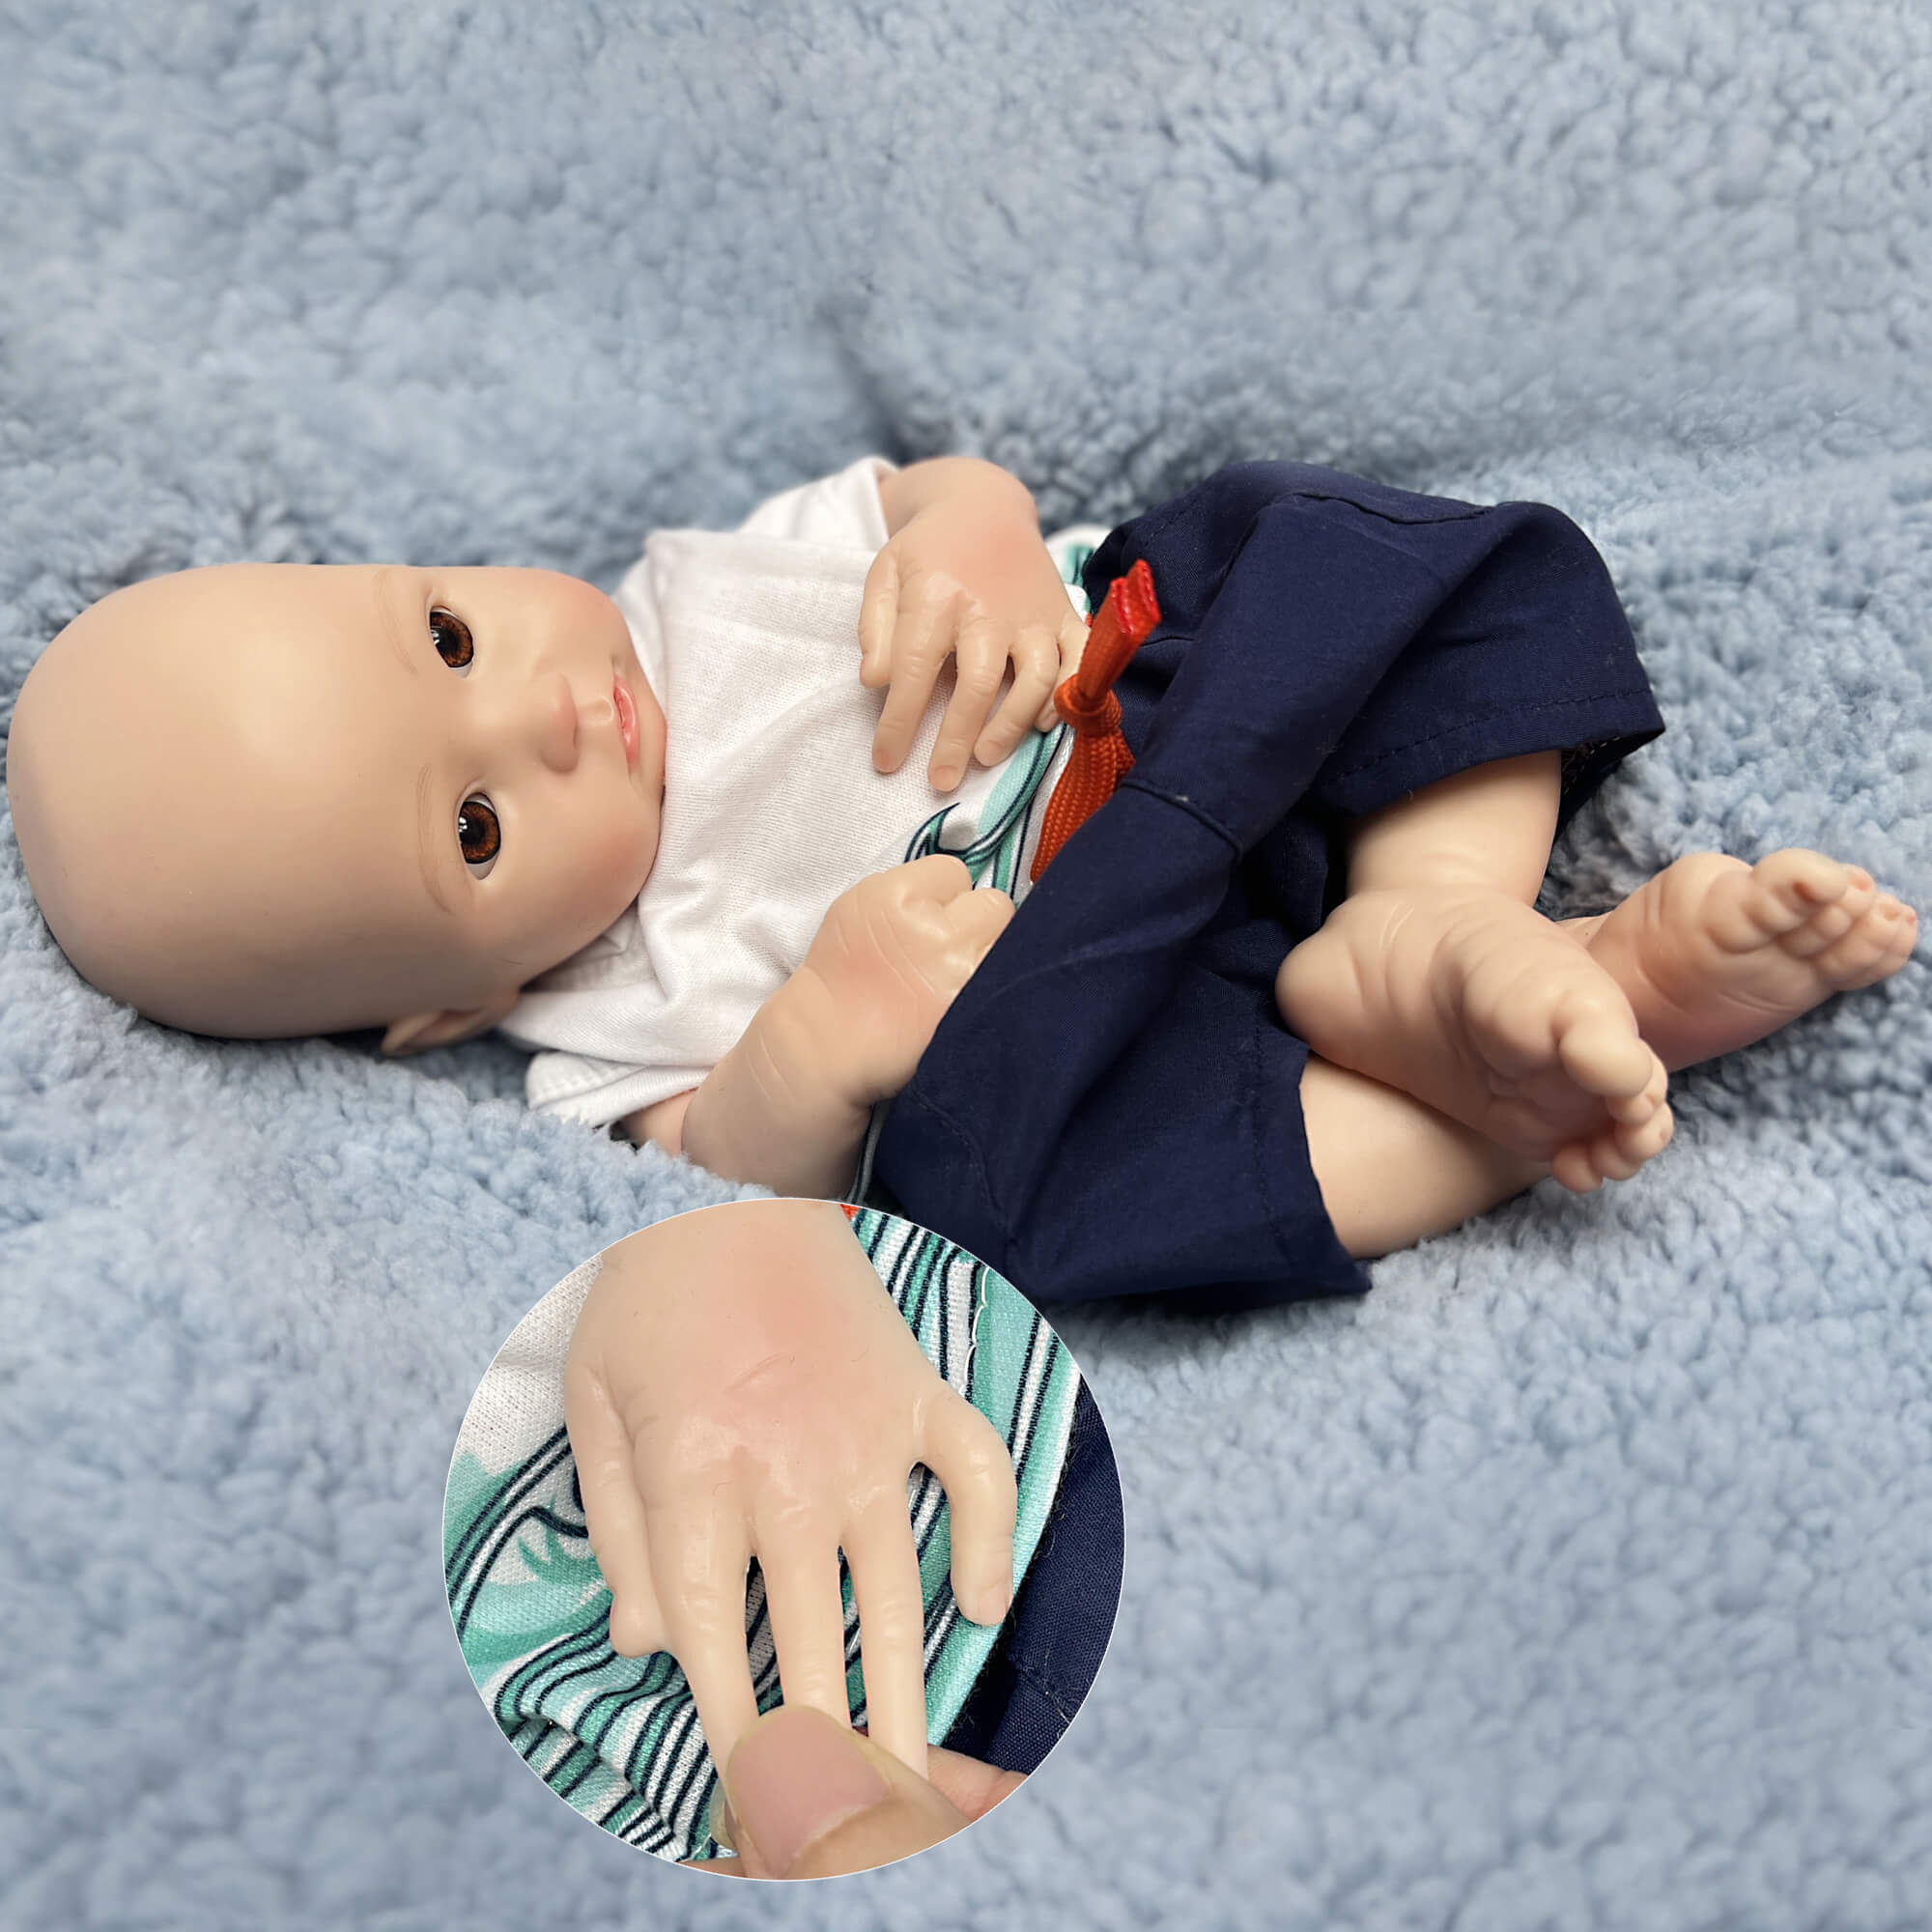 13 Inch Full Body Silicone Baby Dolls That Look Real Not Vinyl Dolls Lifelike Realistic Silicone Baby Dolls for Kids Children Birthday Christmas Toys Present Gifts(Boy)